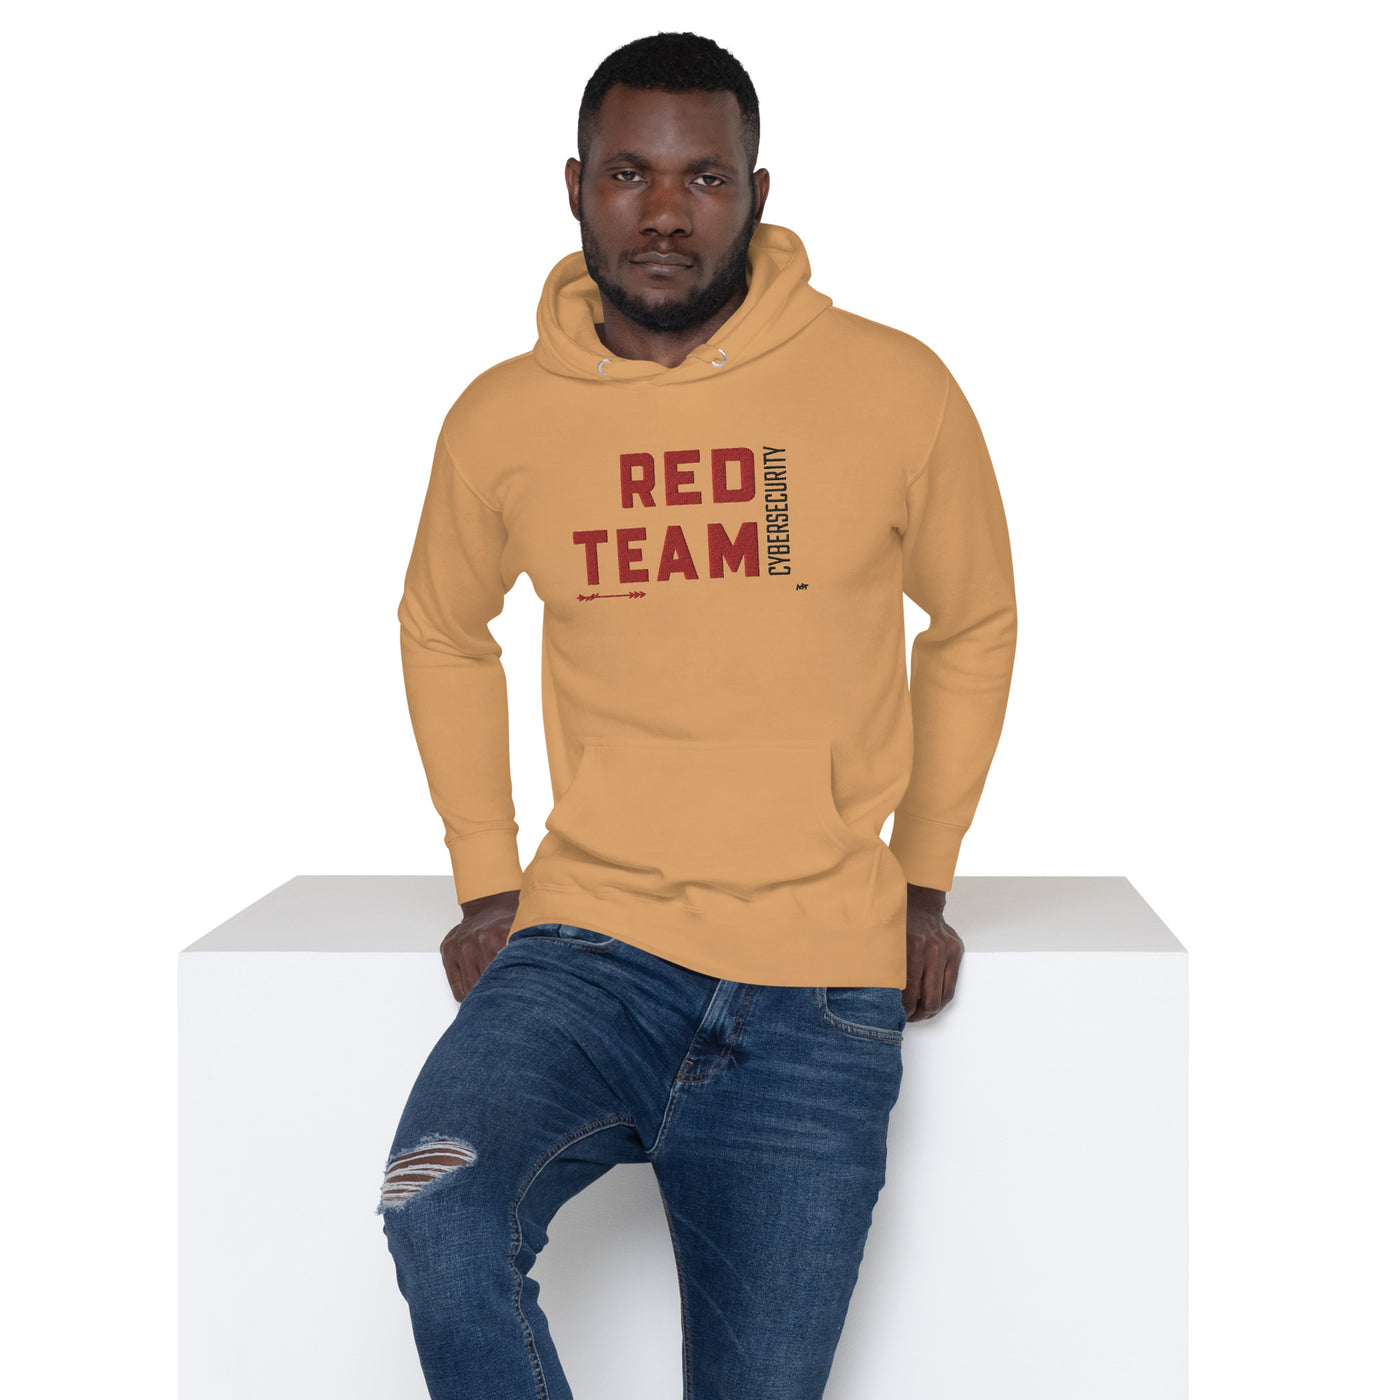 Cyber Security Red Team v7 - Unisex Hoodie Embroidery